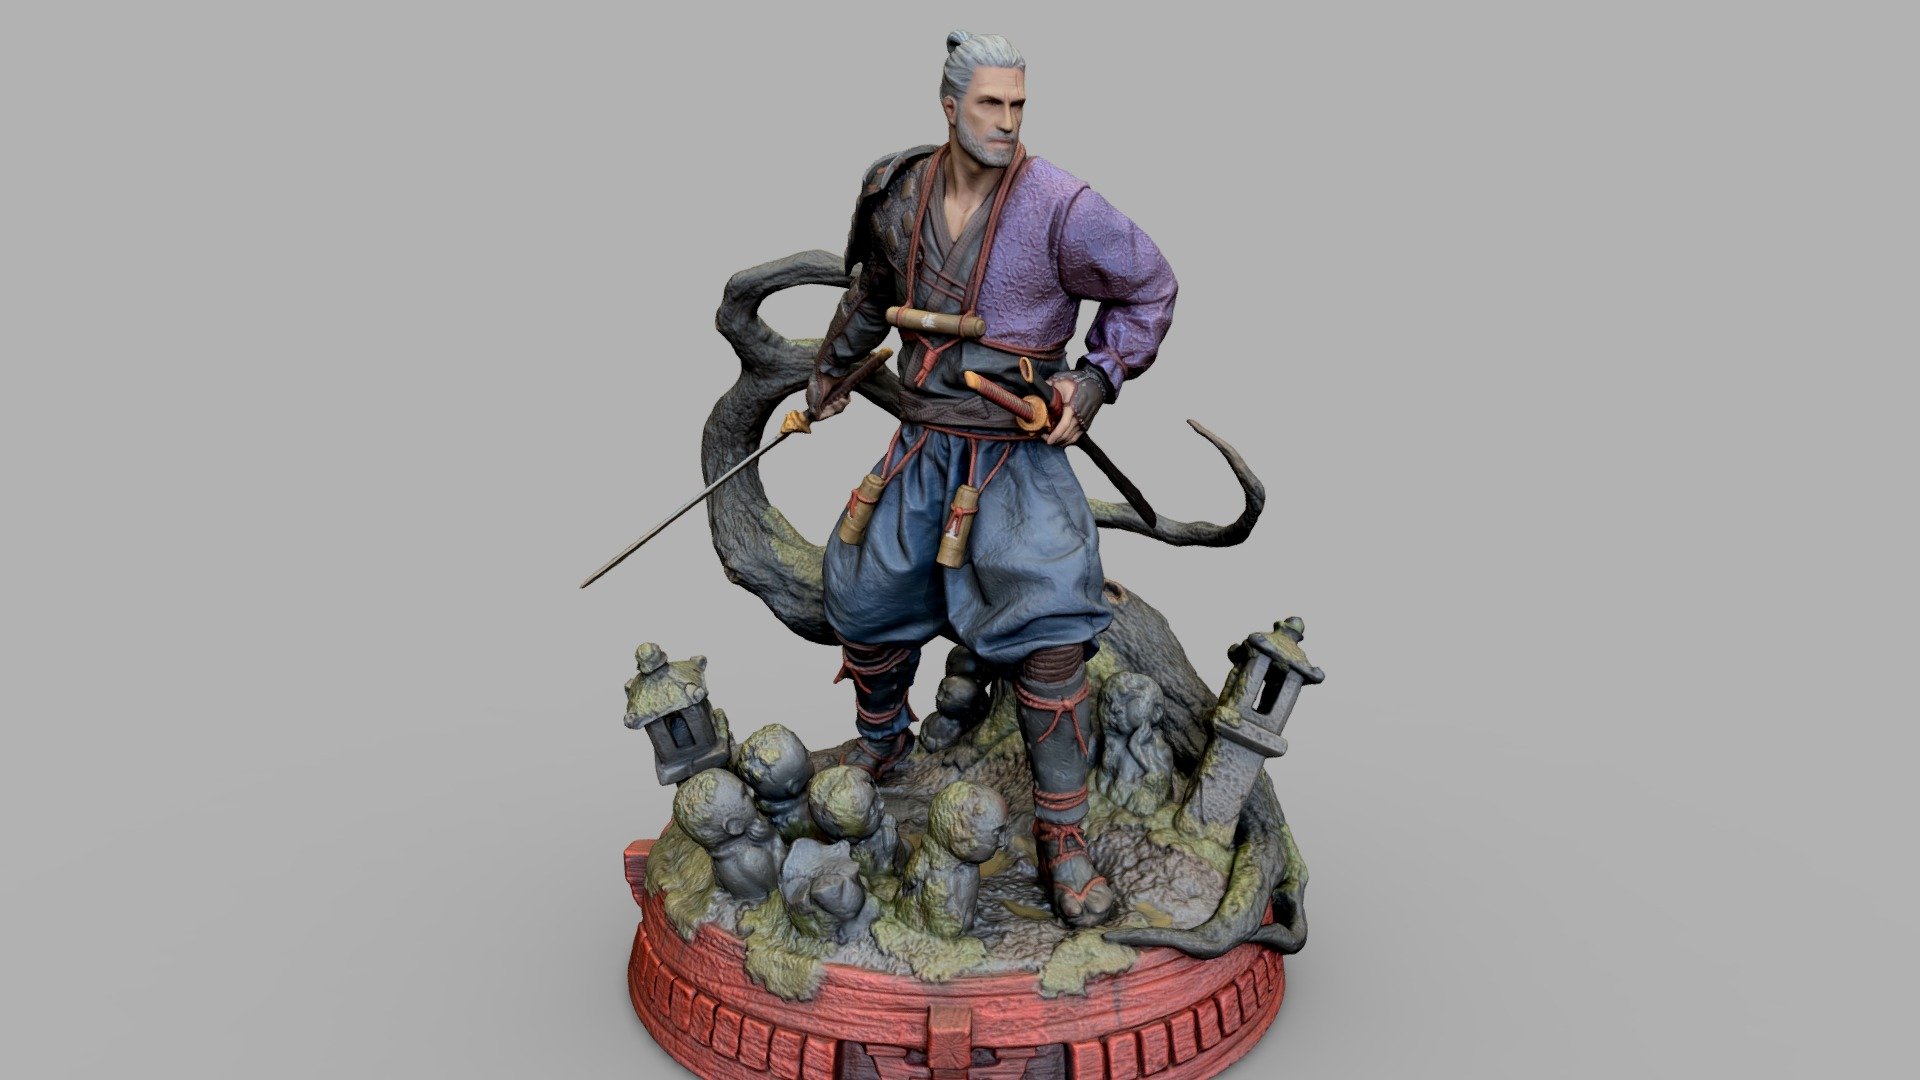 A 3D scan of the standard edition Geralt Ronin figure, a 30cm/12 inches polystone figure by CD Projekt RED.


&ldquo;Shrouded in the darkness of the eerie night, guided only by his instincts, the wandering Rōnin known as Geralt trails a deadly prey across the lands of feudal Japan. Here, he finds himself alone in the cemetery of Koyasan. Alert and equipped for a battle, his every step is calculated and precise — measured with the knowledge that one false step could spell the end. Blade in hand, this skilled swordmaster is prepared to take on whatever yōkai lurks amongst the resting dead.